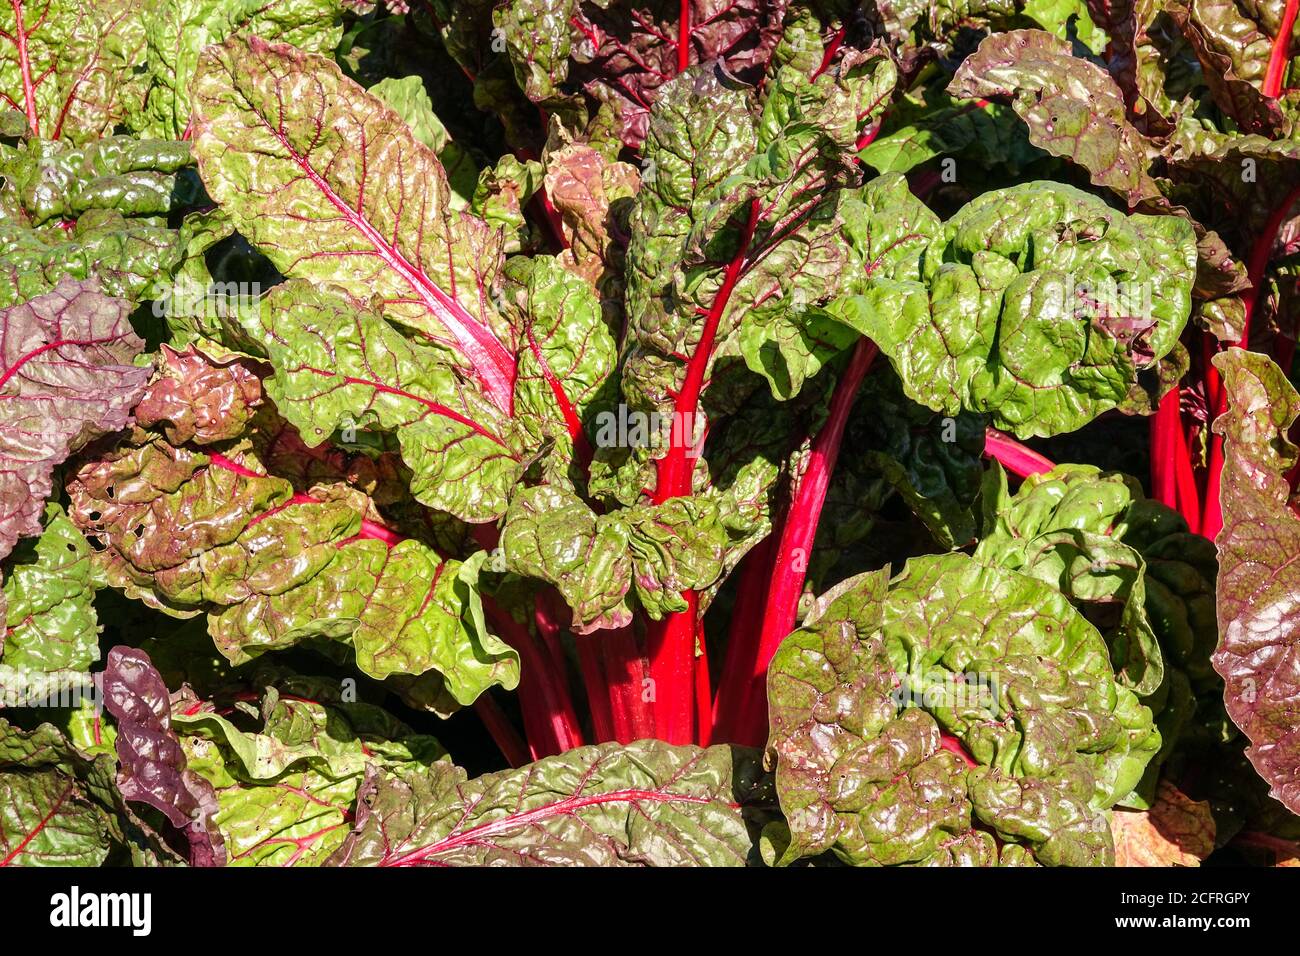 Red mangold, Swiss Chard row in the vegetable garden produce Stock Photo